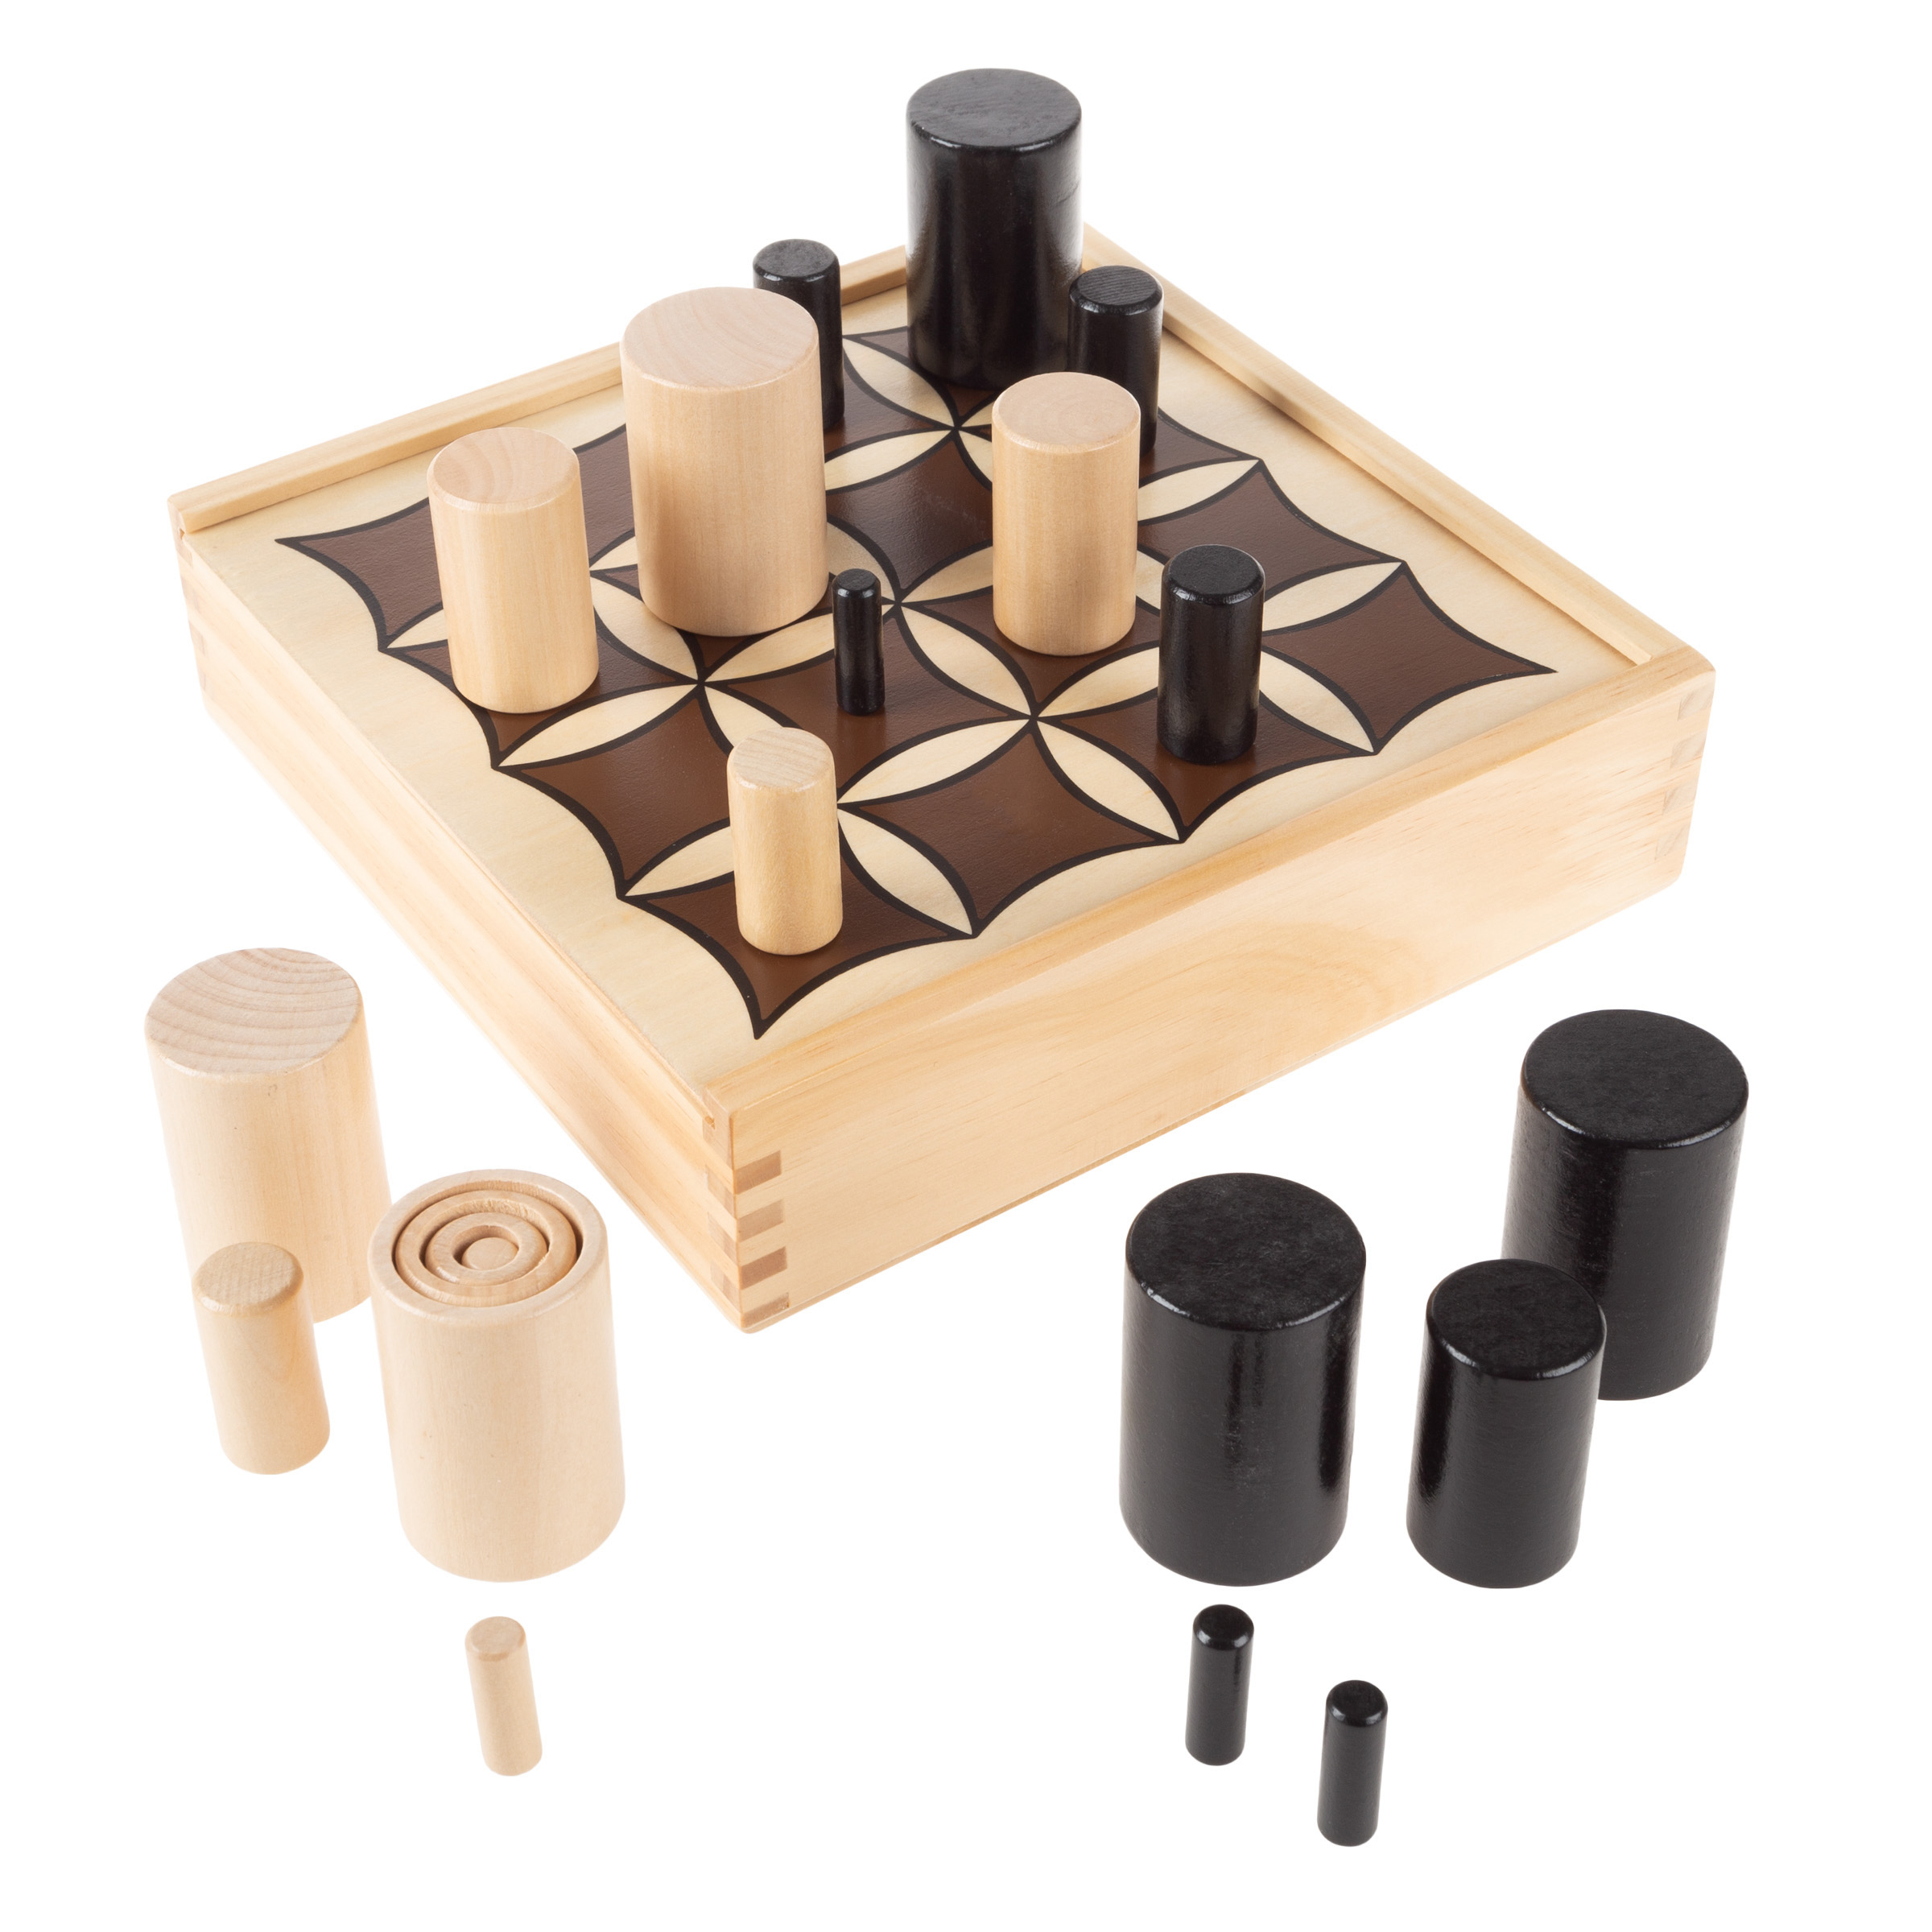 2 Player 3D Tic Tac Toe – Wooden Tabletop Strategy, Logic And Skill Board Game